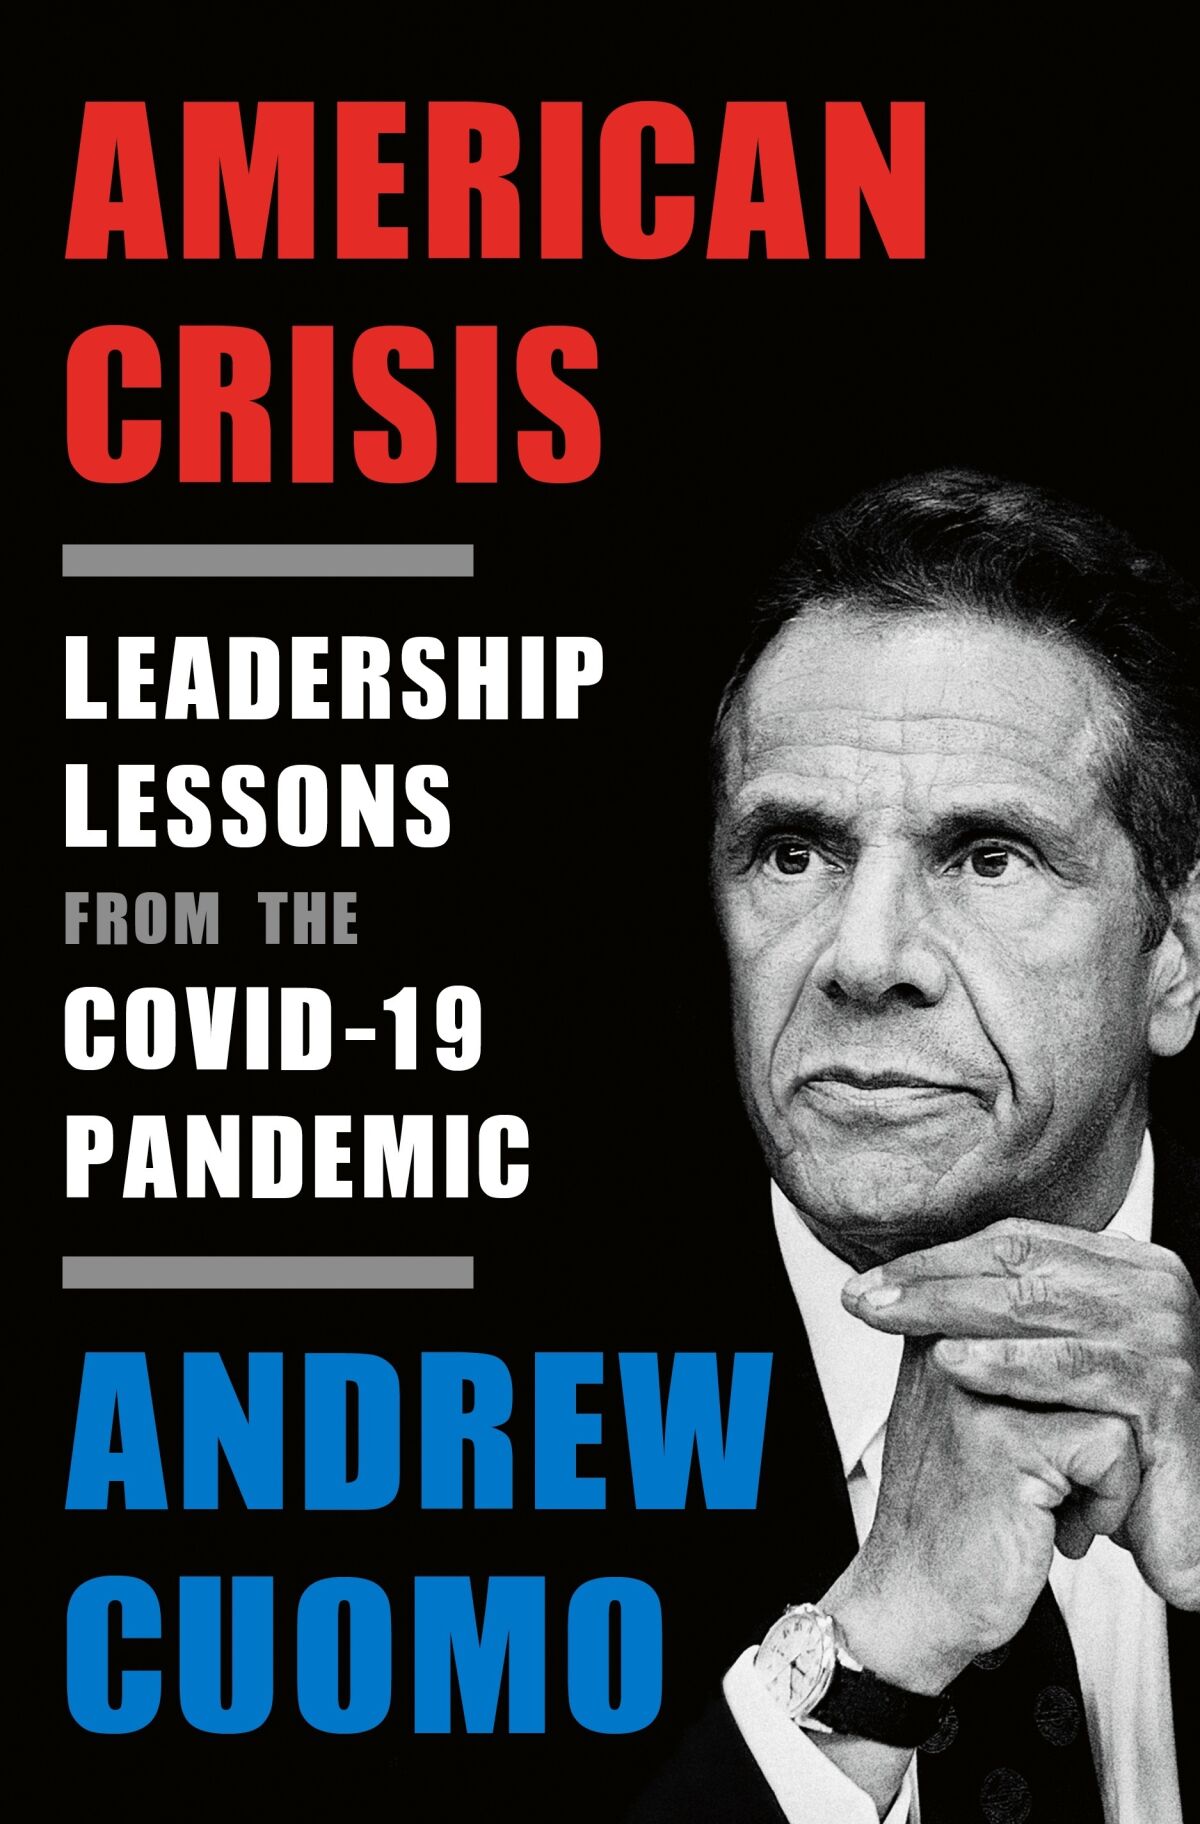 This cover image released by Crown shows "American Crisis: Leadership Lessons From the Covid-19 Pandemic" by Andrew Cuomo. The New York governor has gained a national following through his management of the coronavirus pandemic. Now he's writing a book that looks back on his experiences. It includes leadership advice and a close look at his relationship with the administration of President Donald Trump. Crown announced Thursday that Cuomo’s “American Crisis” will be released Oct. 13. (Crown via AP)